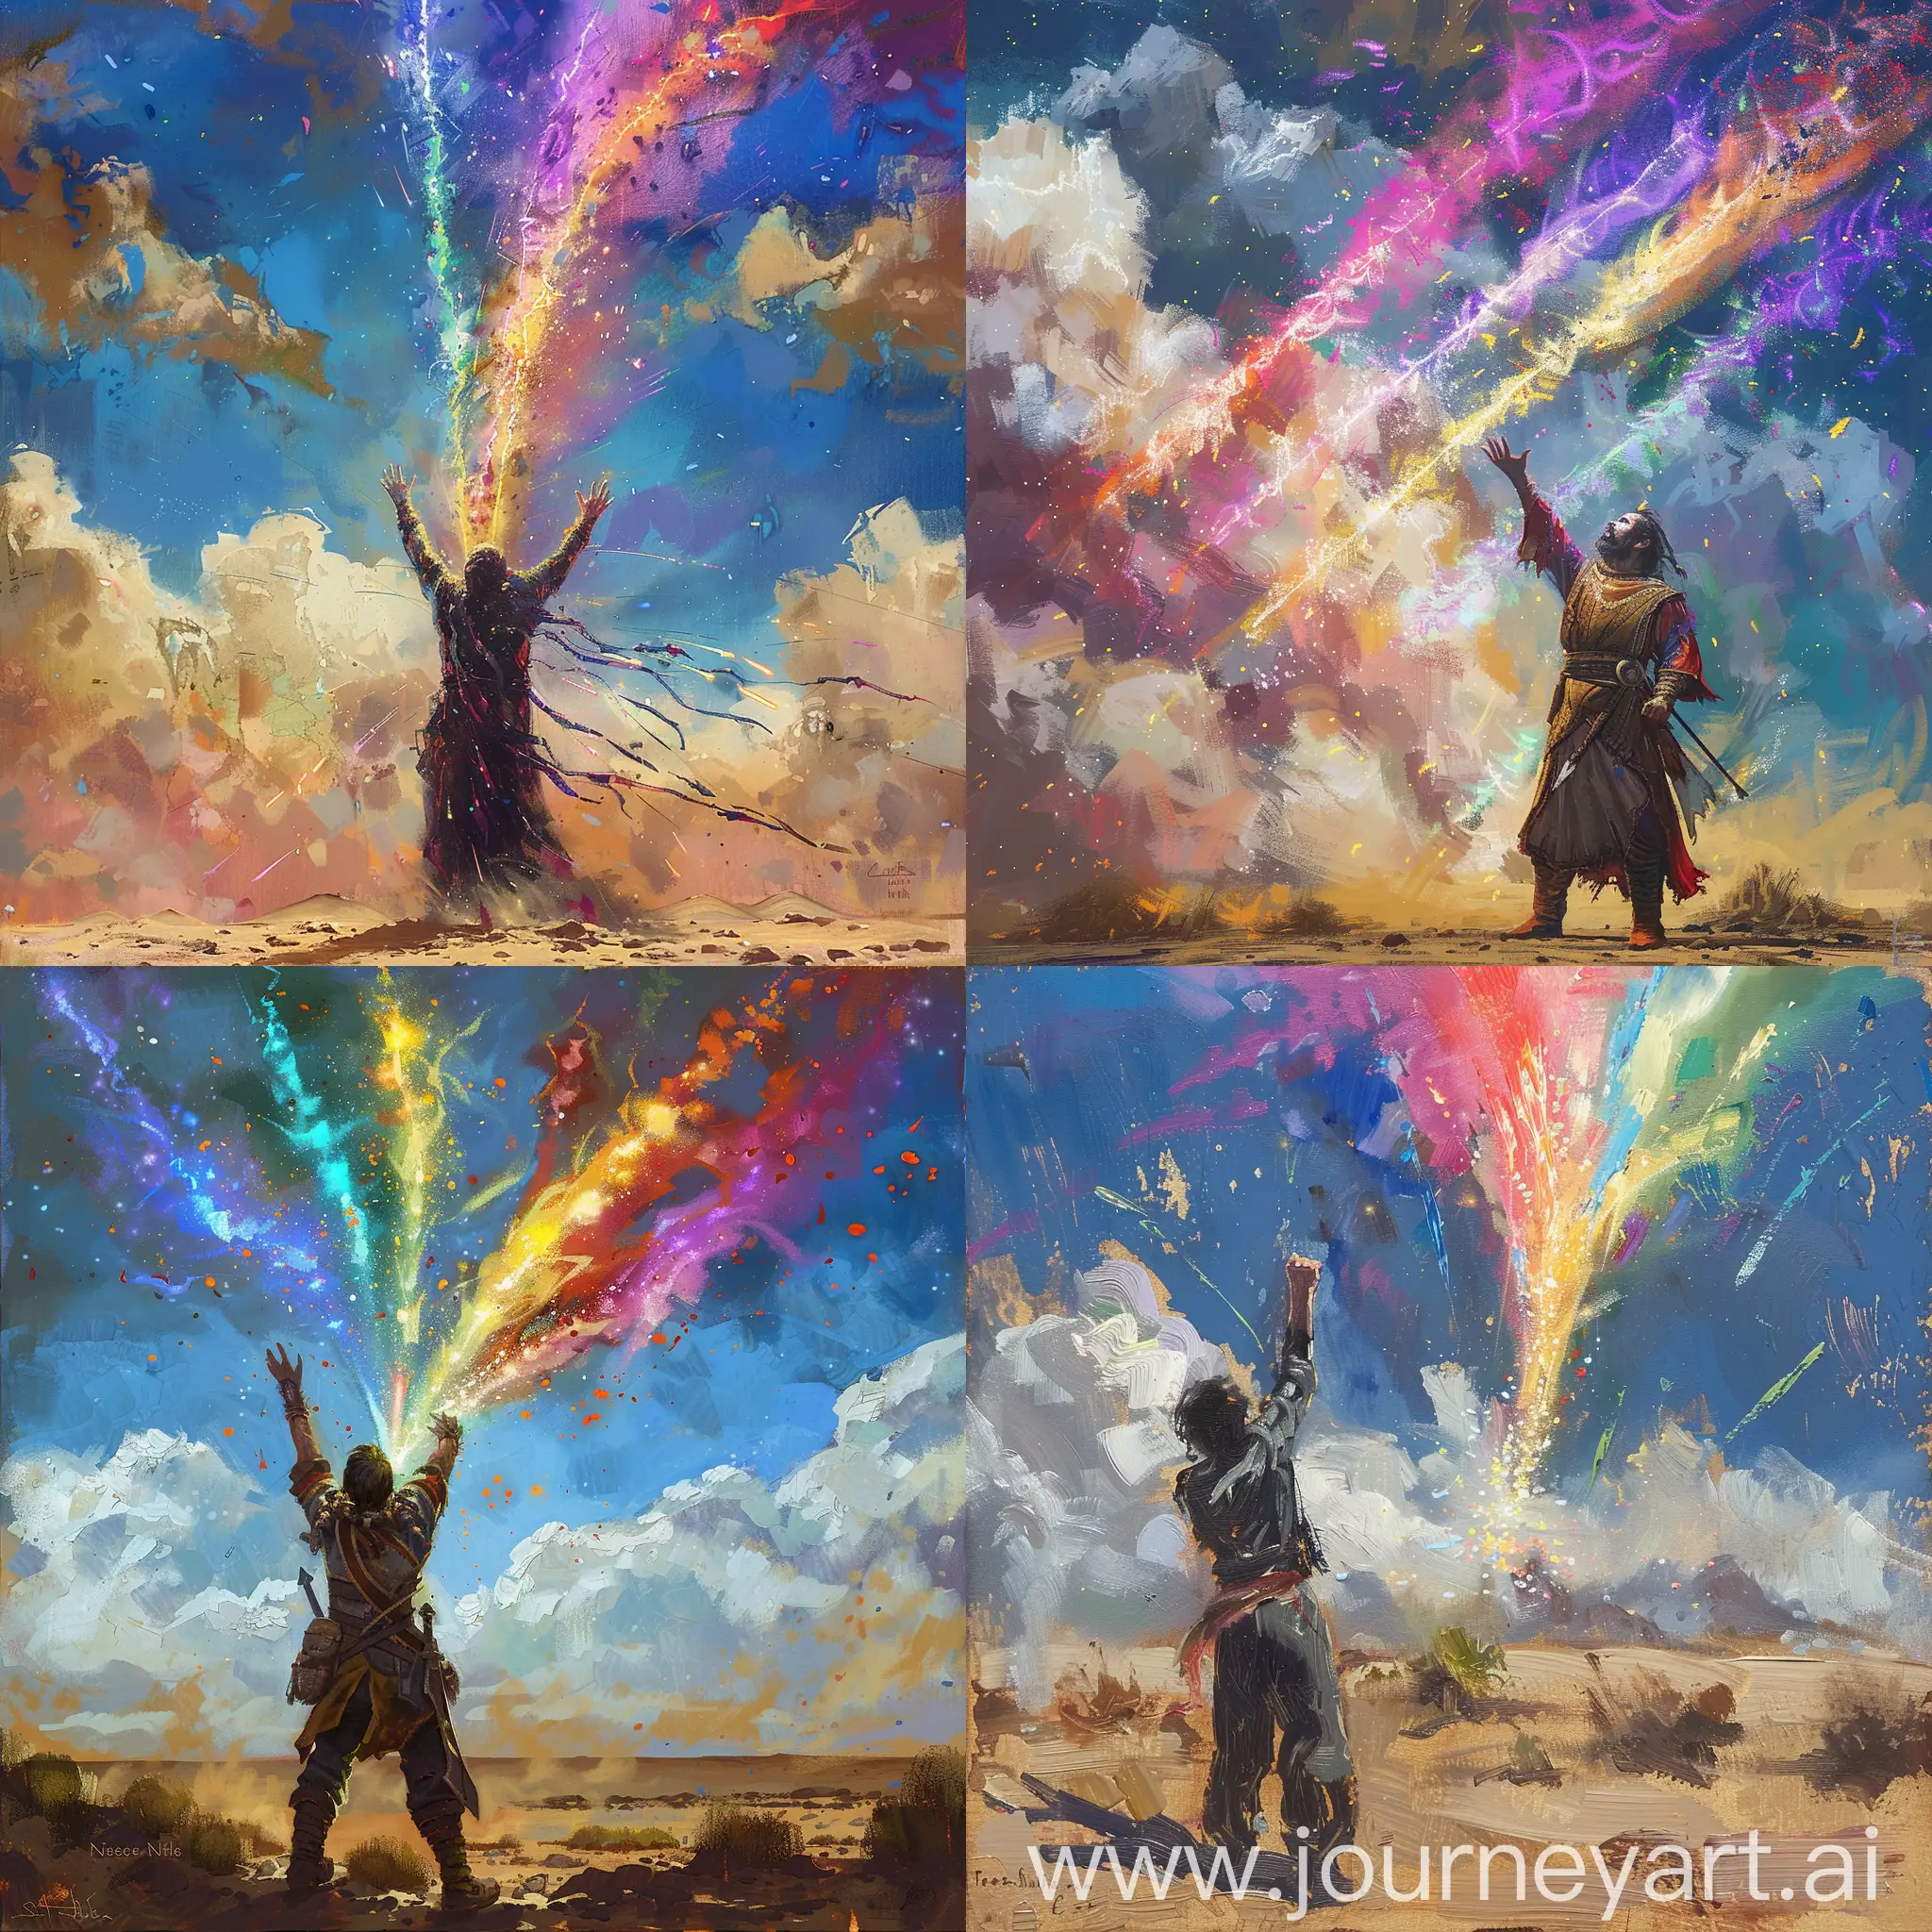 dessert battle mage with his arms raised over his head shooting a spectrum of color magic into the sky.
In the art style of Terese Nielsen oil painting.